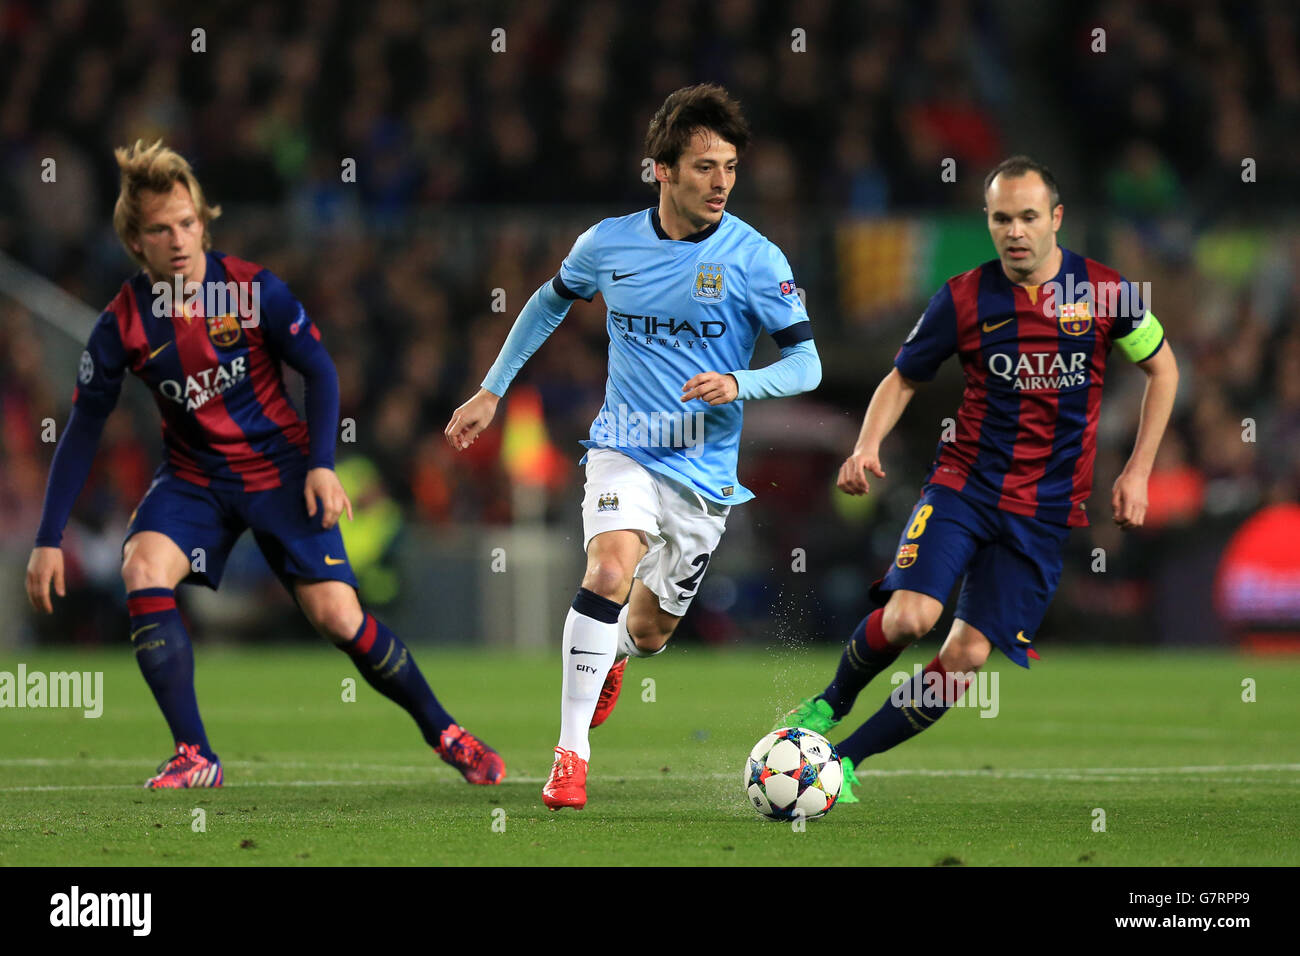 Soccer - UEFA Champions League - Round of 16 - Second Leg - Barcelona v Manchester City - Camp Nou. Manchester City's David Silva takes on Barcelona's Ivan Rakitic (left) and Andres Iniesta (right) Stock Photo